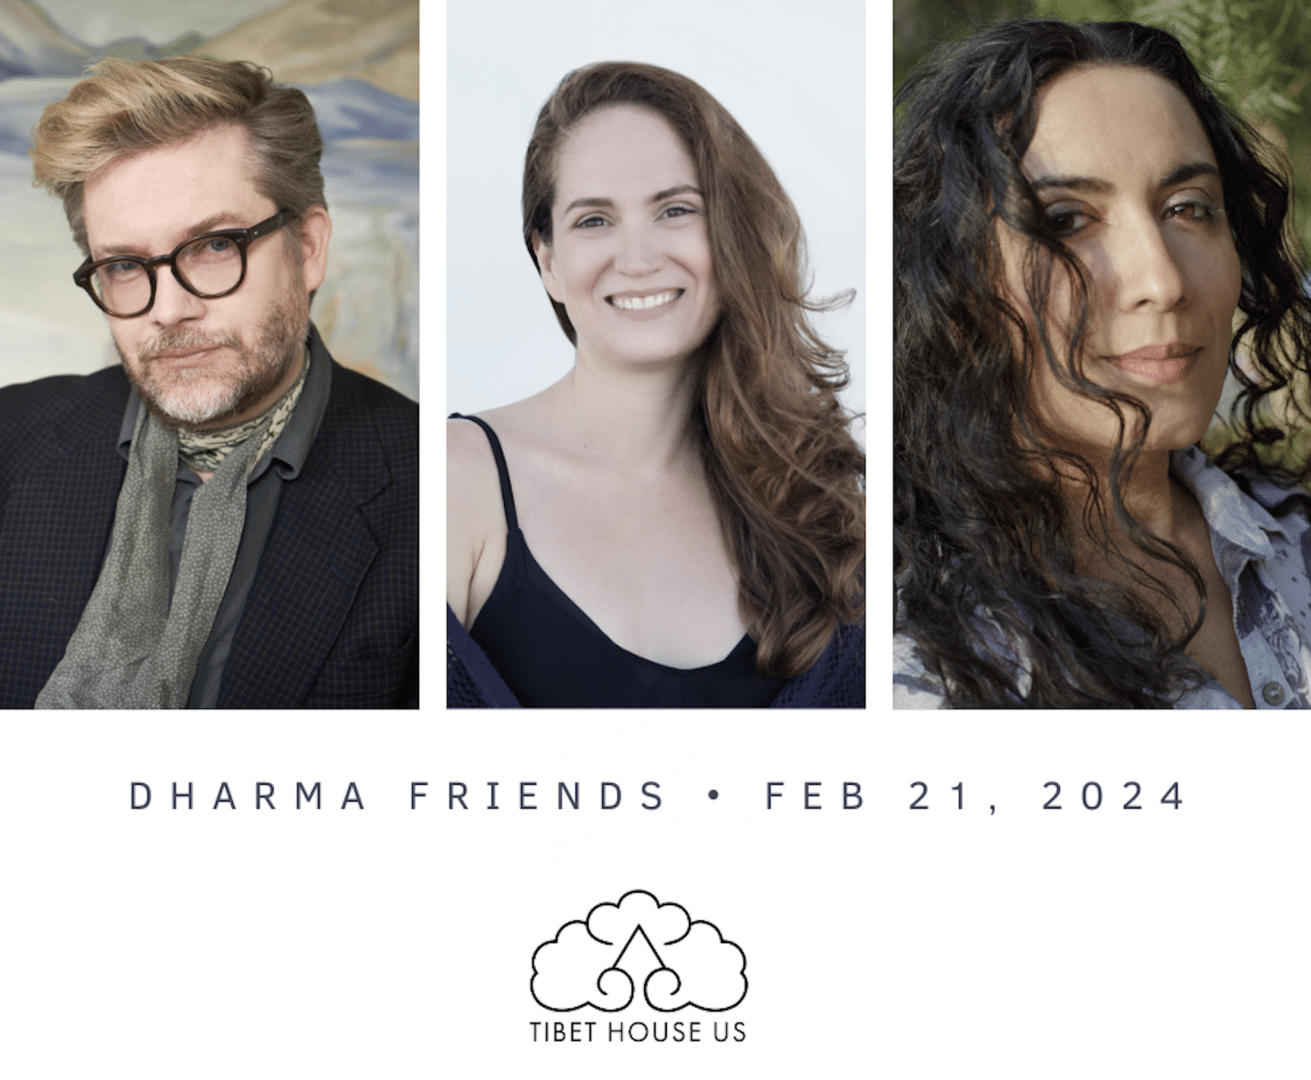 Dharma Friends: A Monthly Community Gathering with Megan Mook, Kevin Townley, and special guests